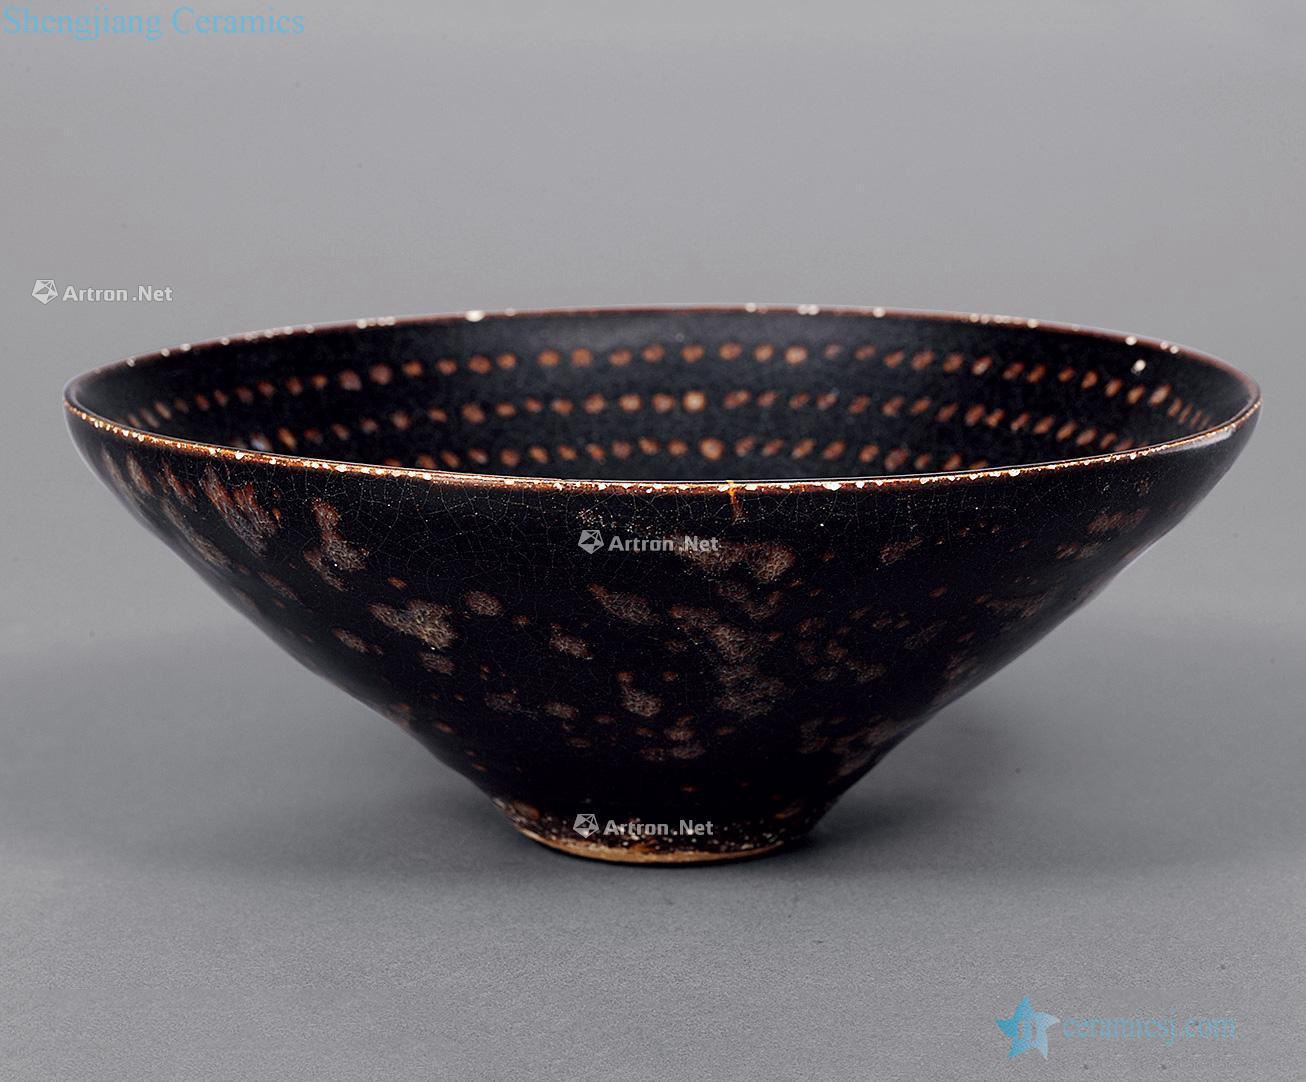 The song dynasty Ji states hat to bowl